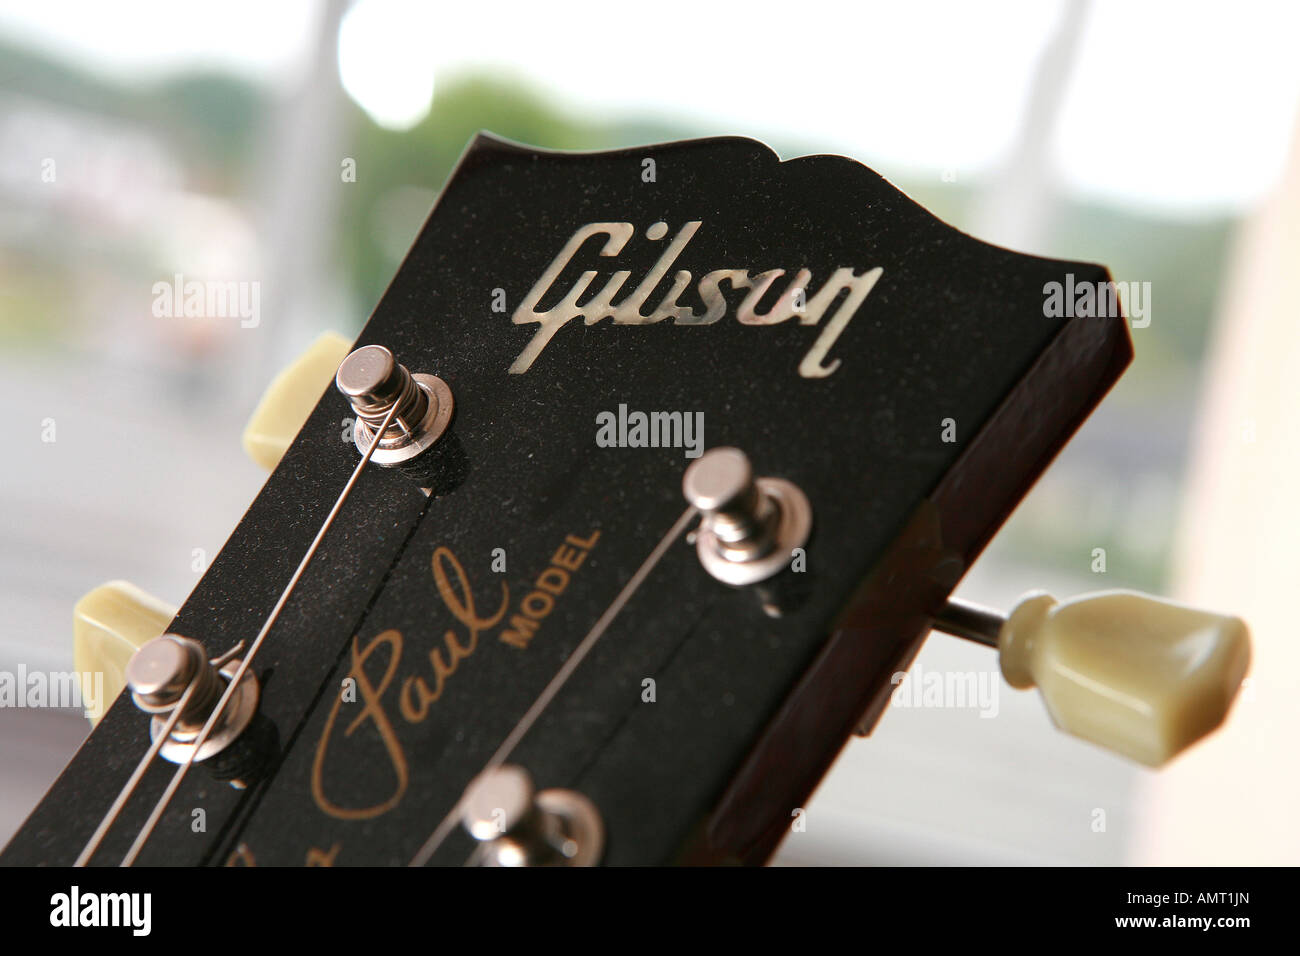 Close up of head of Gibson electric guitar Stock Photo